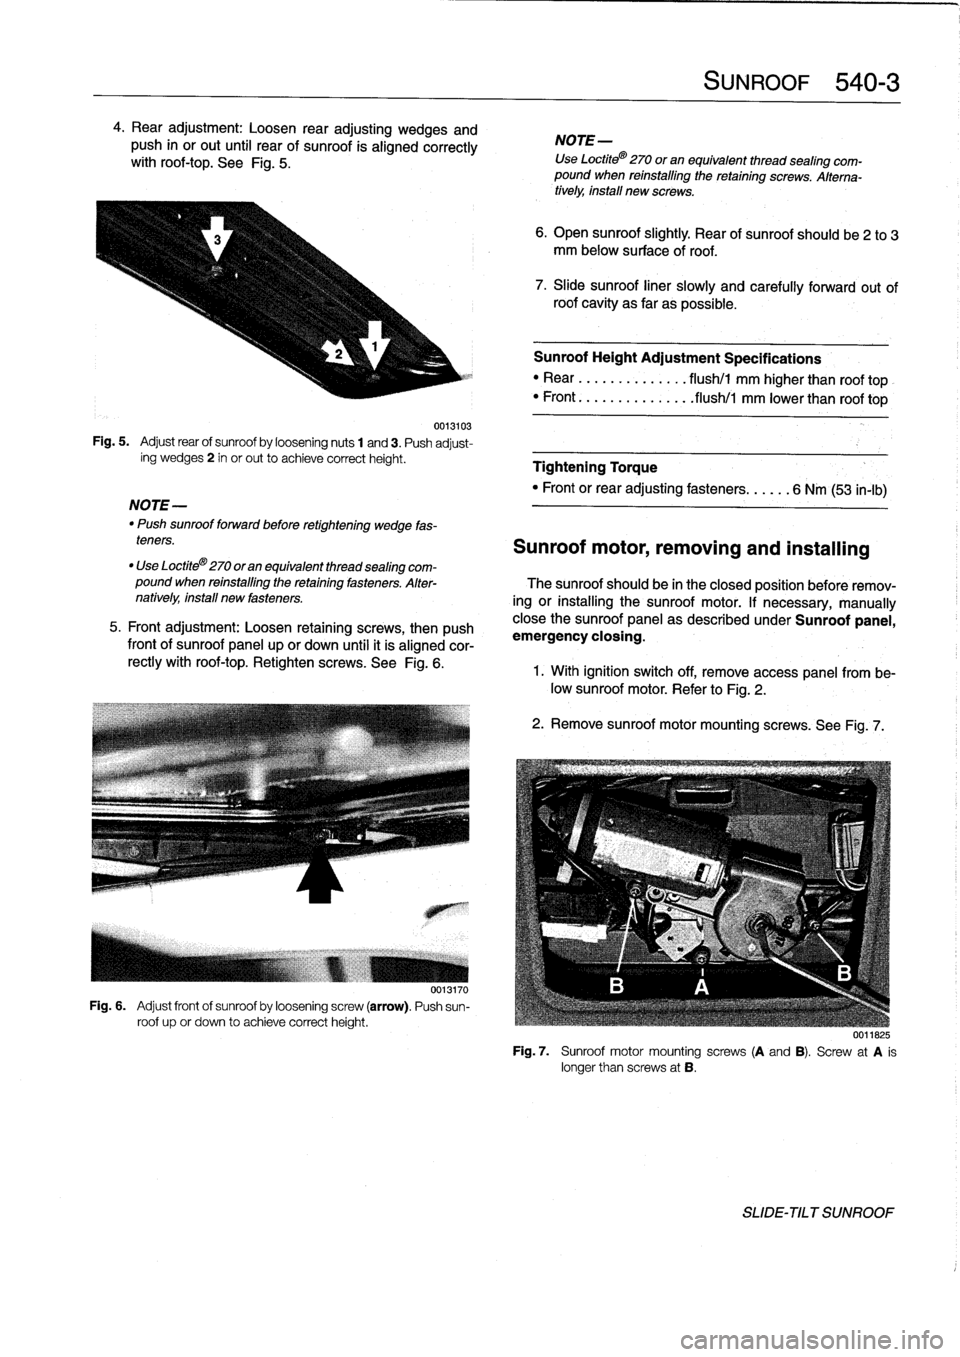 BMW 328i 1994 E36 Workshop Manual 4
.
Rear
adjustment
:
Loosen
rear
adjusting
wedges
and
push
in
or
out
until
rear
of
sunroof
is
aligned
correctly
withroof-top
.
See
Fig
.
5
.

0013103
Fig
.
5
.

	

Adjust
rear
of
sunroof
by
loosening